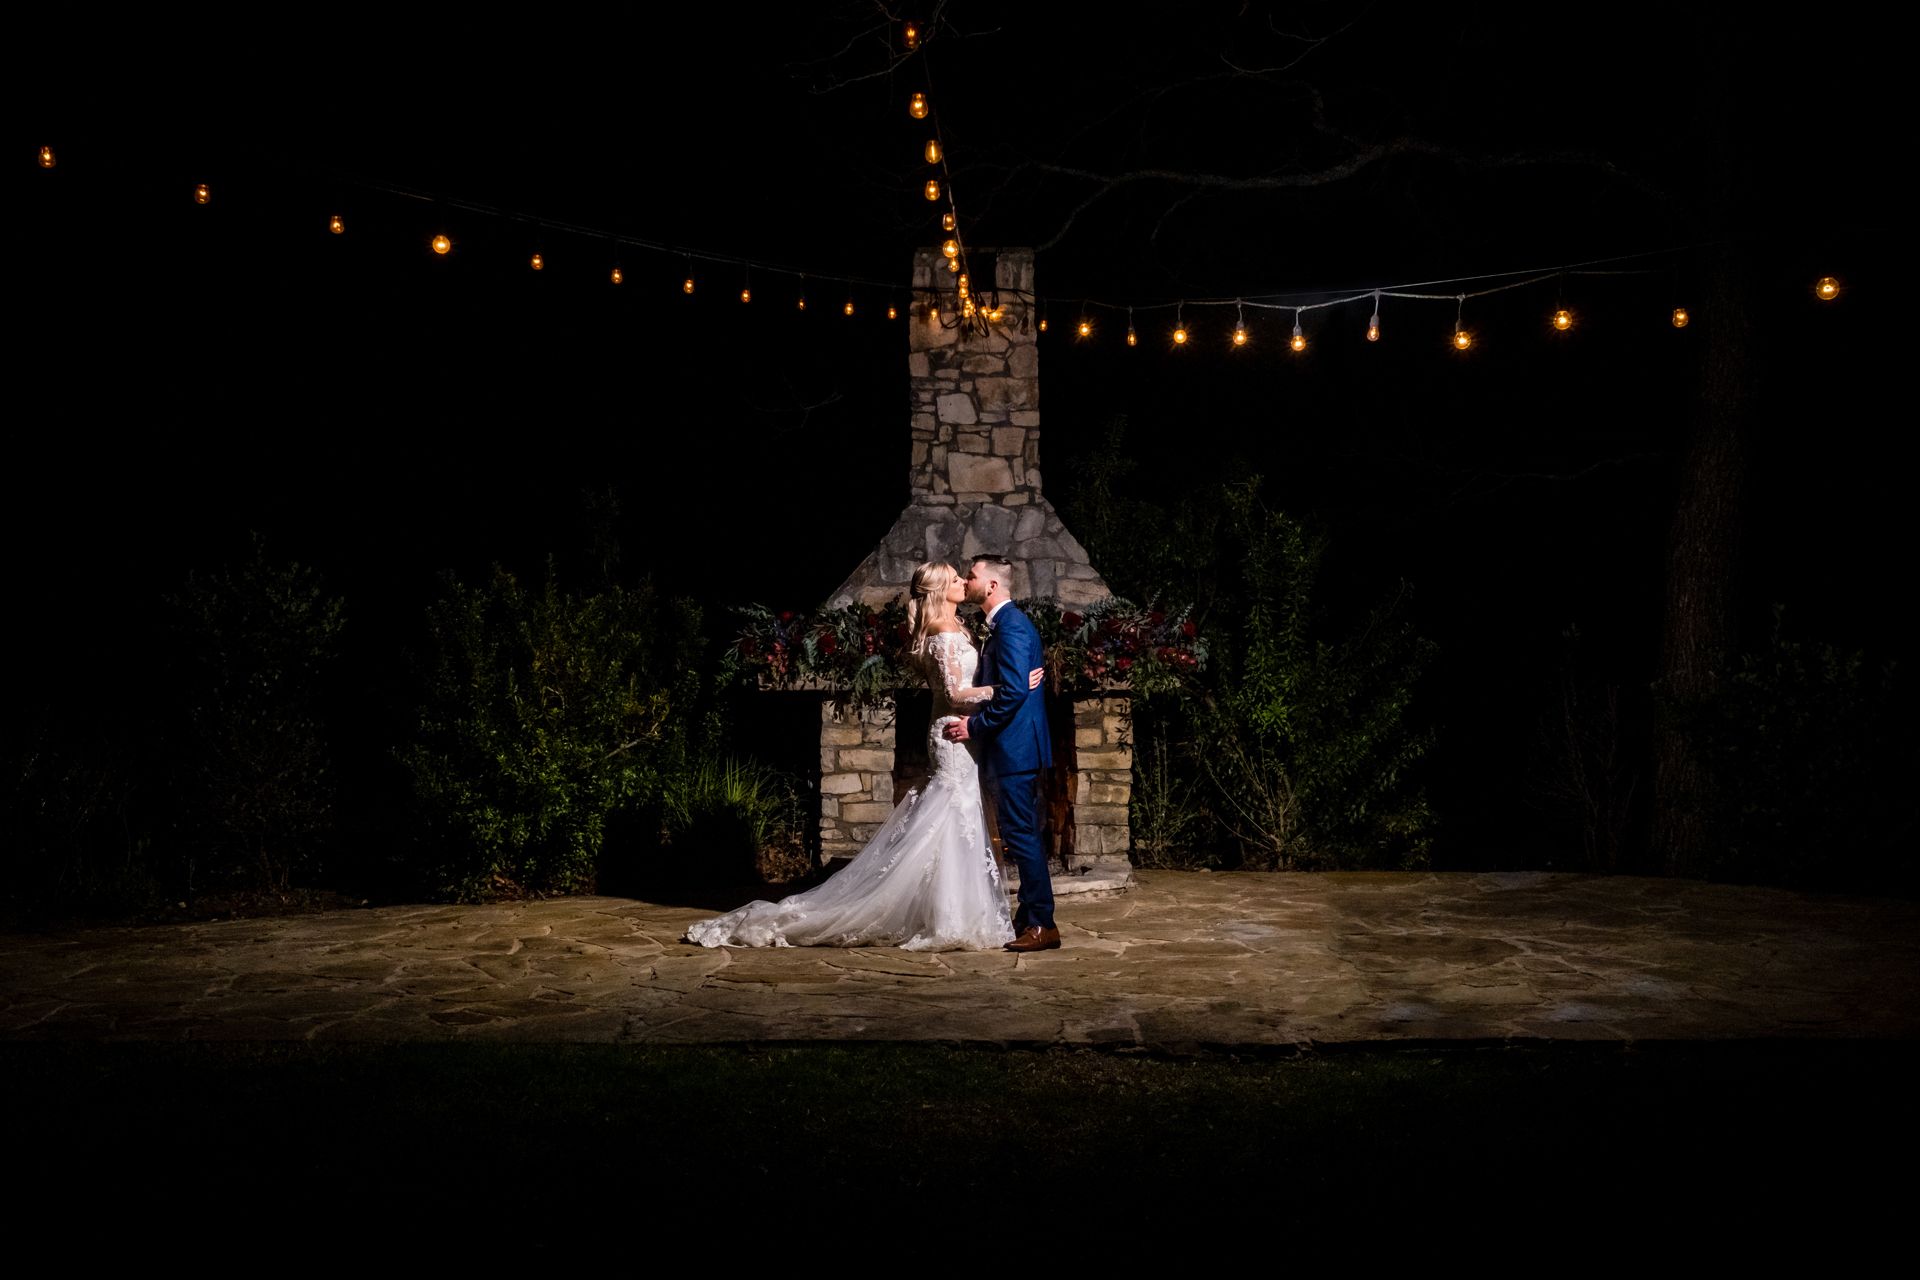 Bride and groom kiss under a string of bistro lights at night. A rustic fireplace is in the background. 